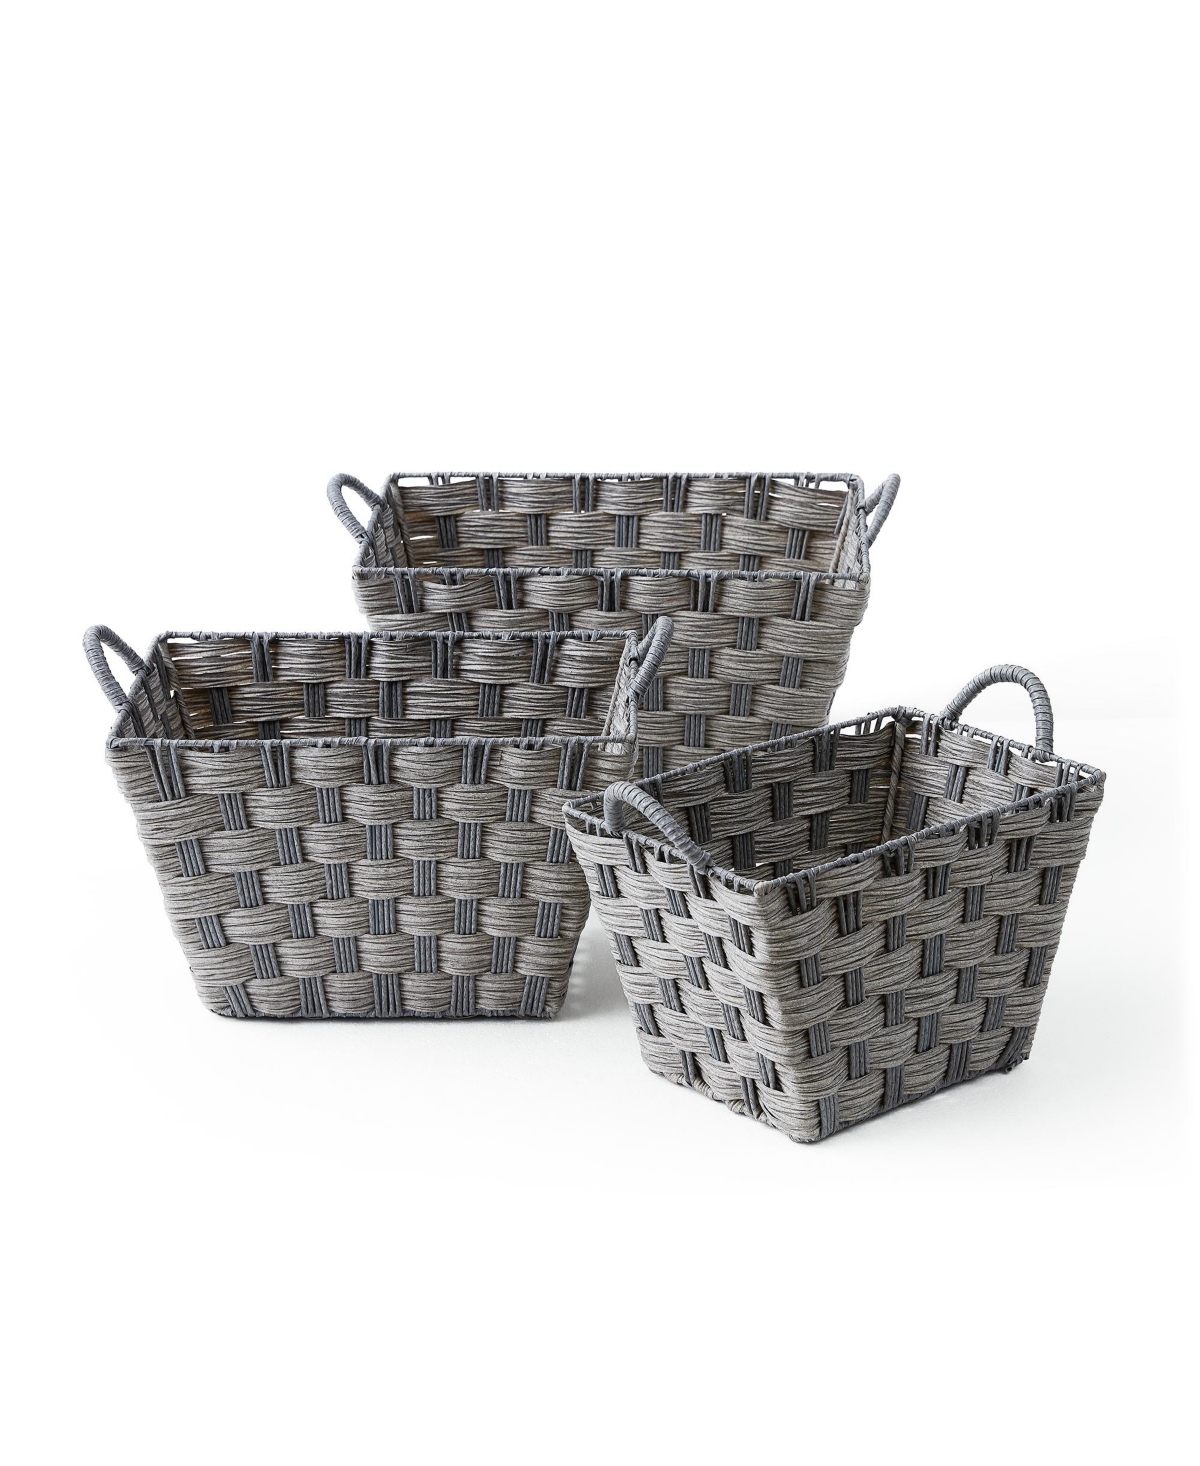 3 Piece Rectangular Faux Wicker Storage Bin Set in Combo Weave with Cut Out Handles - Gray